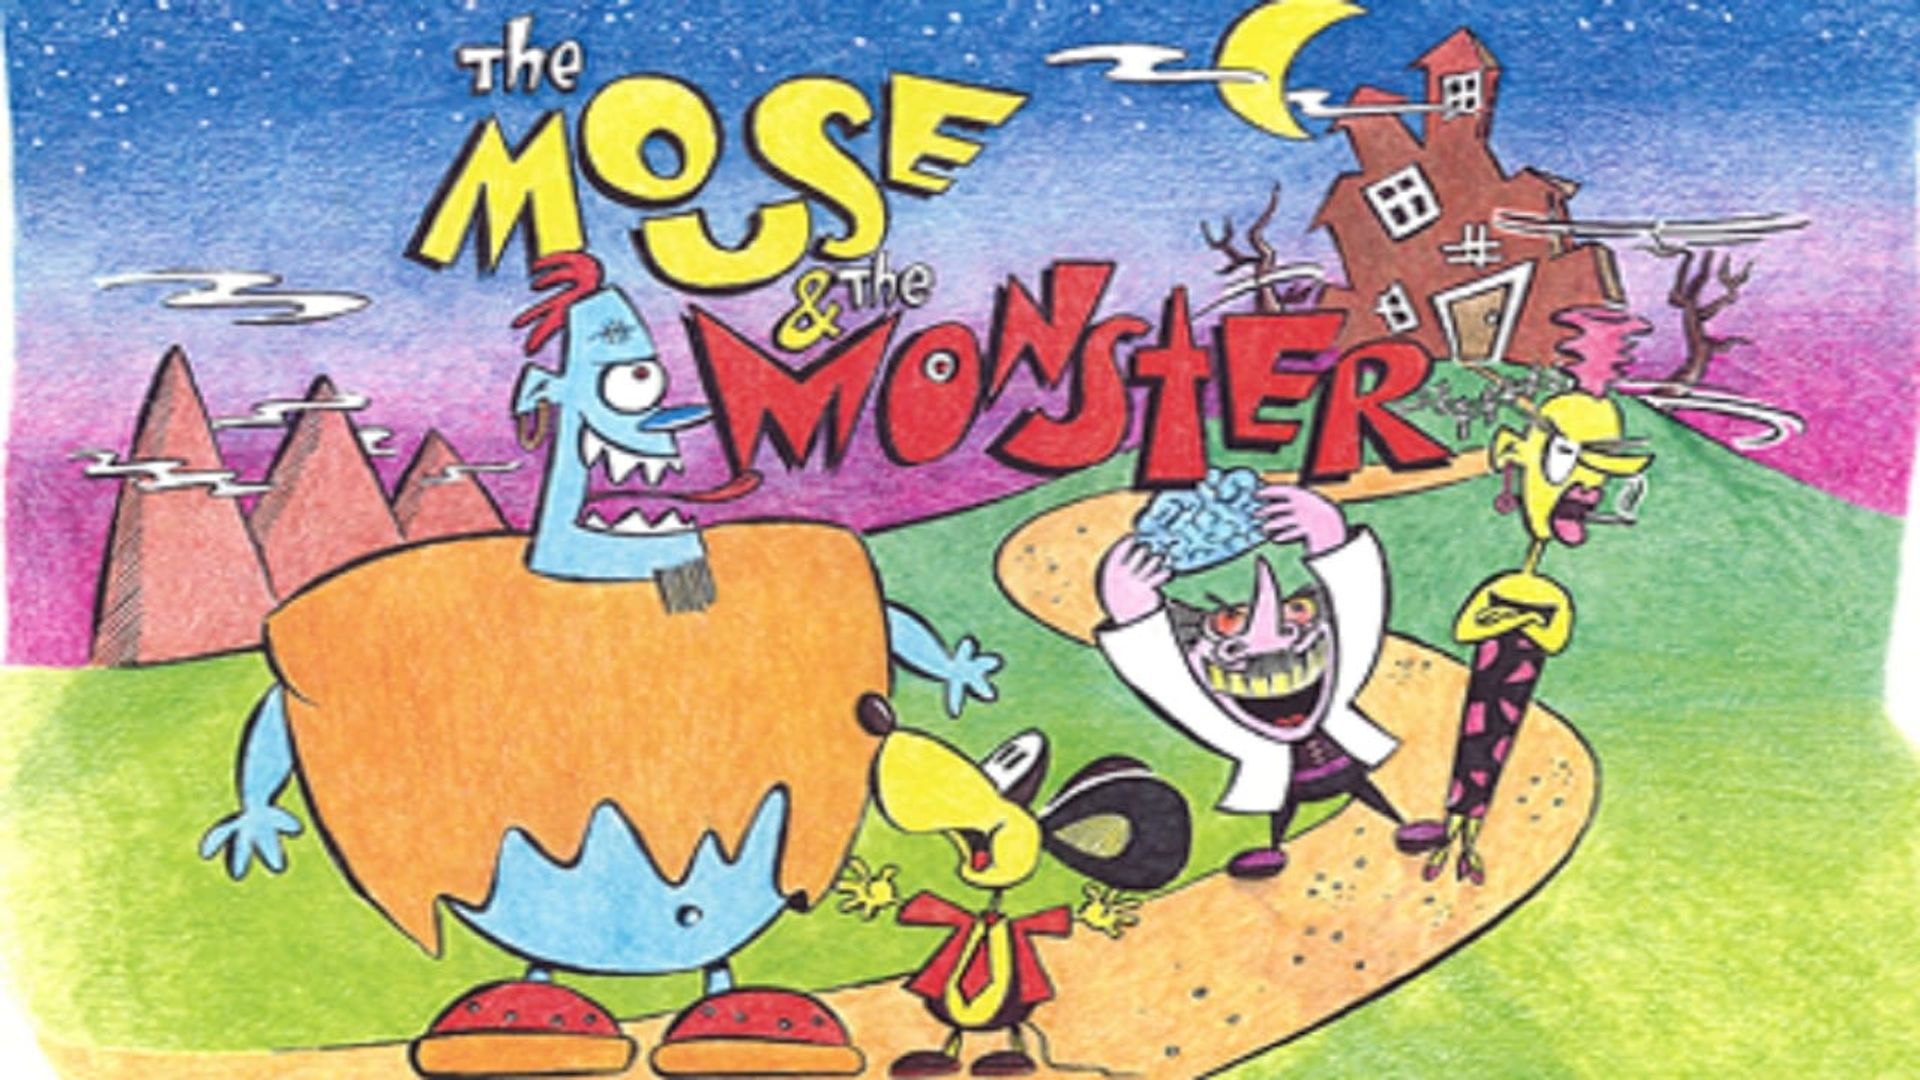 The Mouse and the Monster background